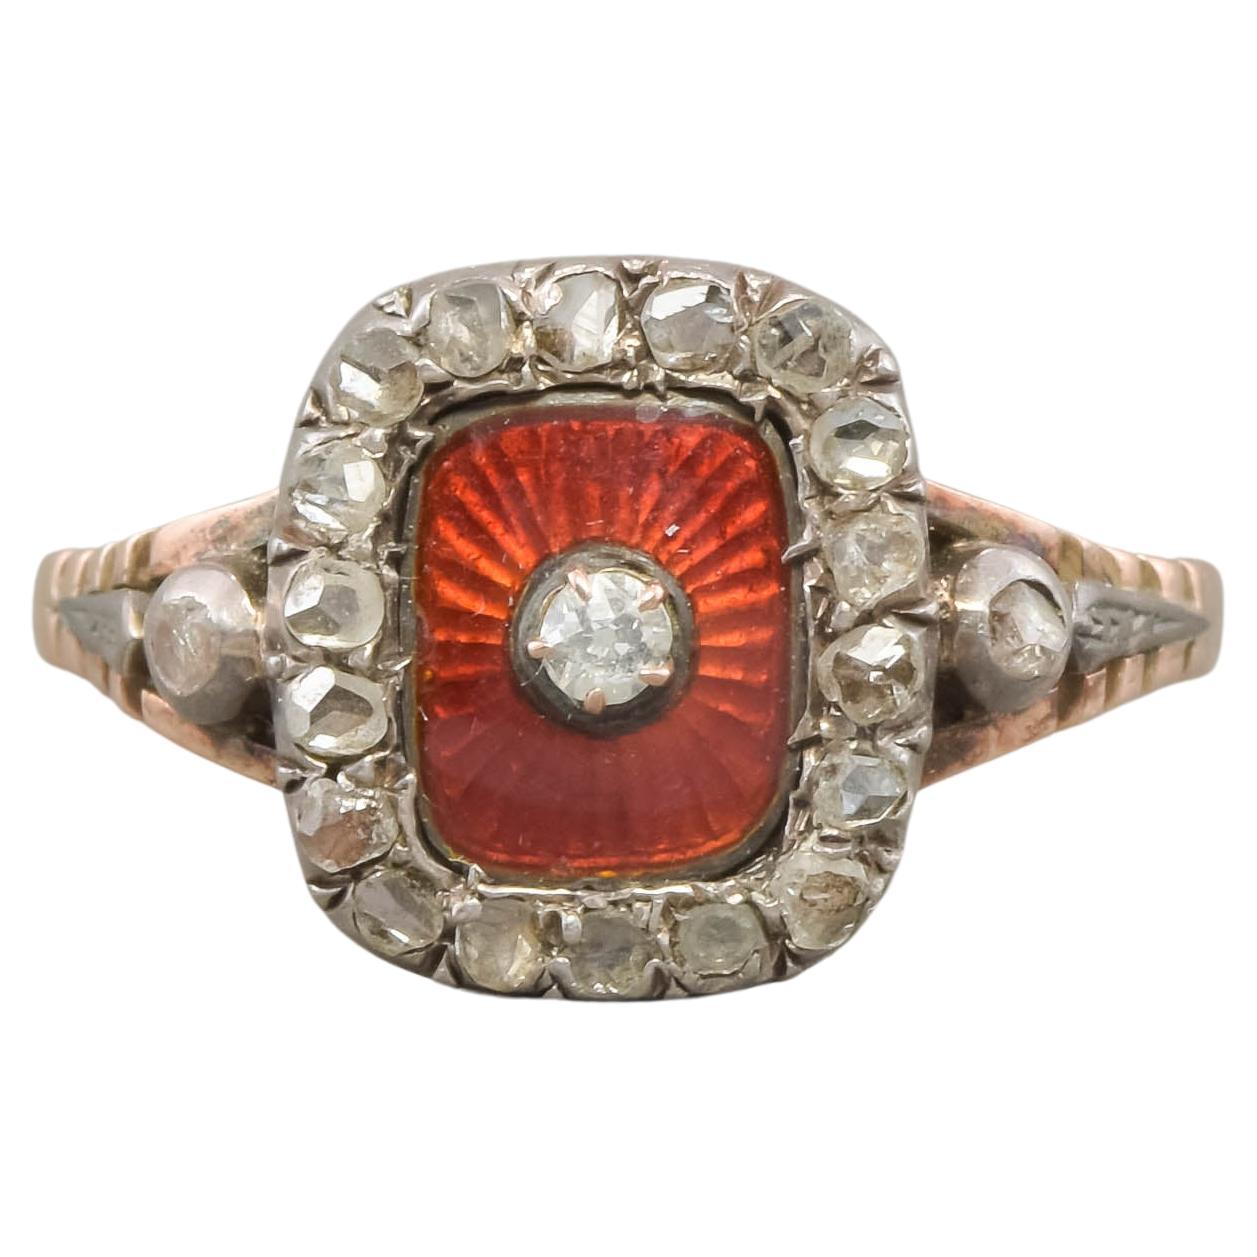 Antique Diamond & Scarlet Guilloche Enamel Ring with Provenance For Sale